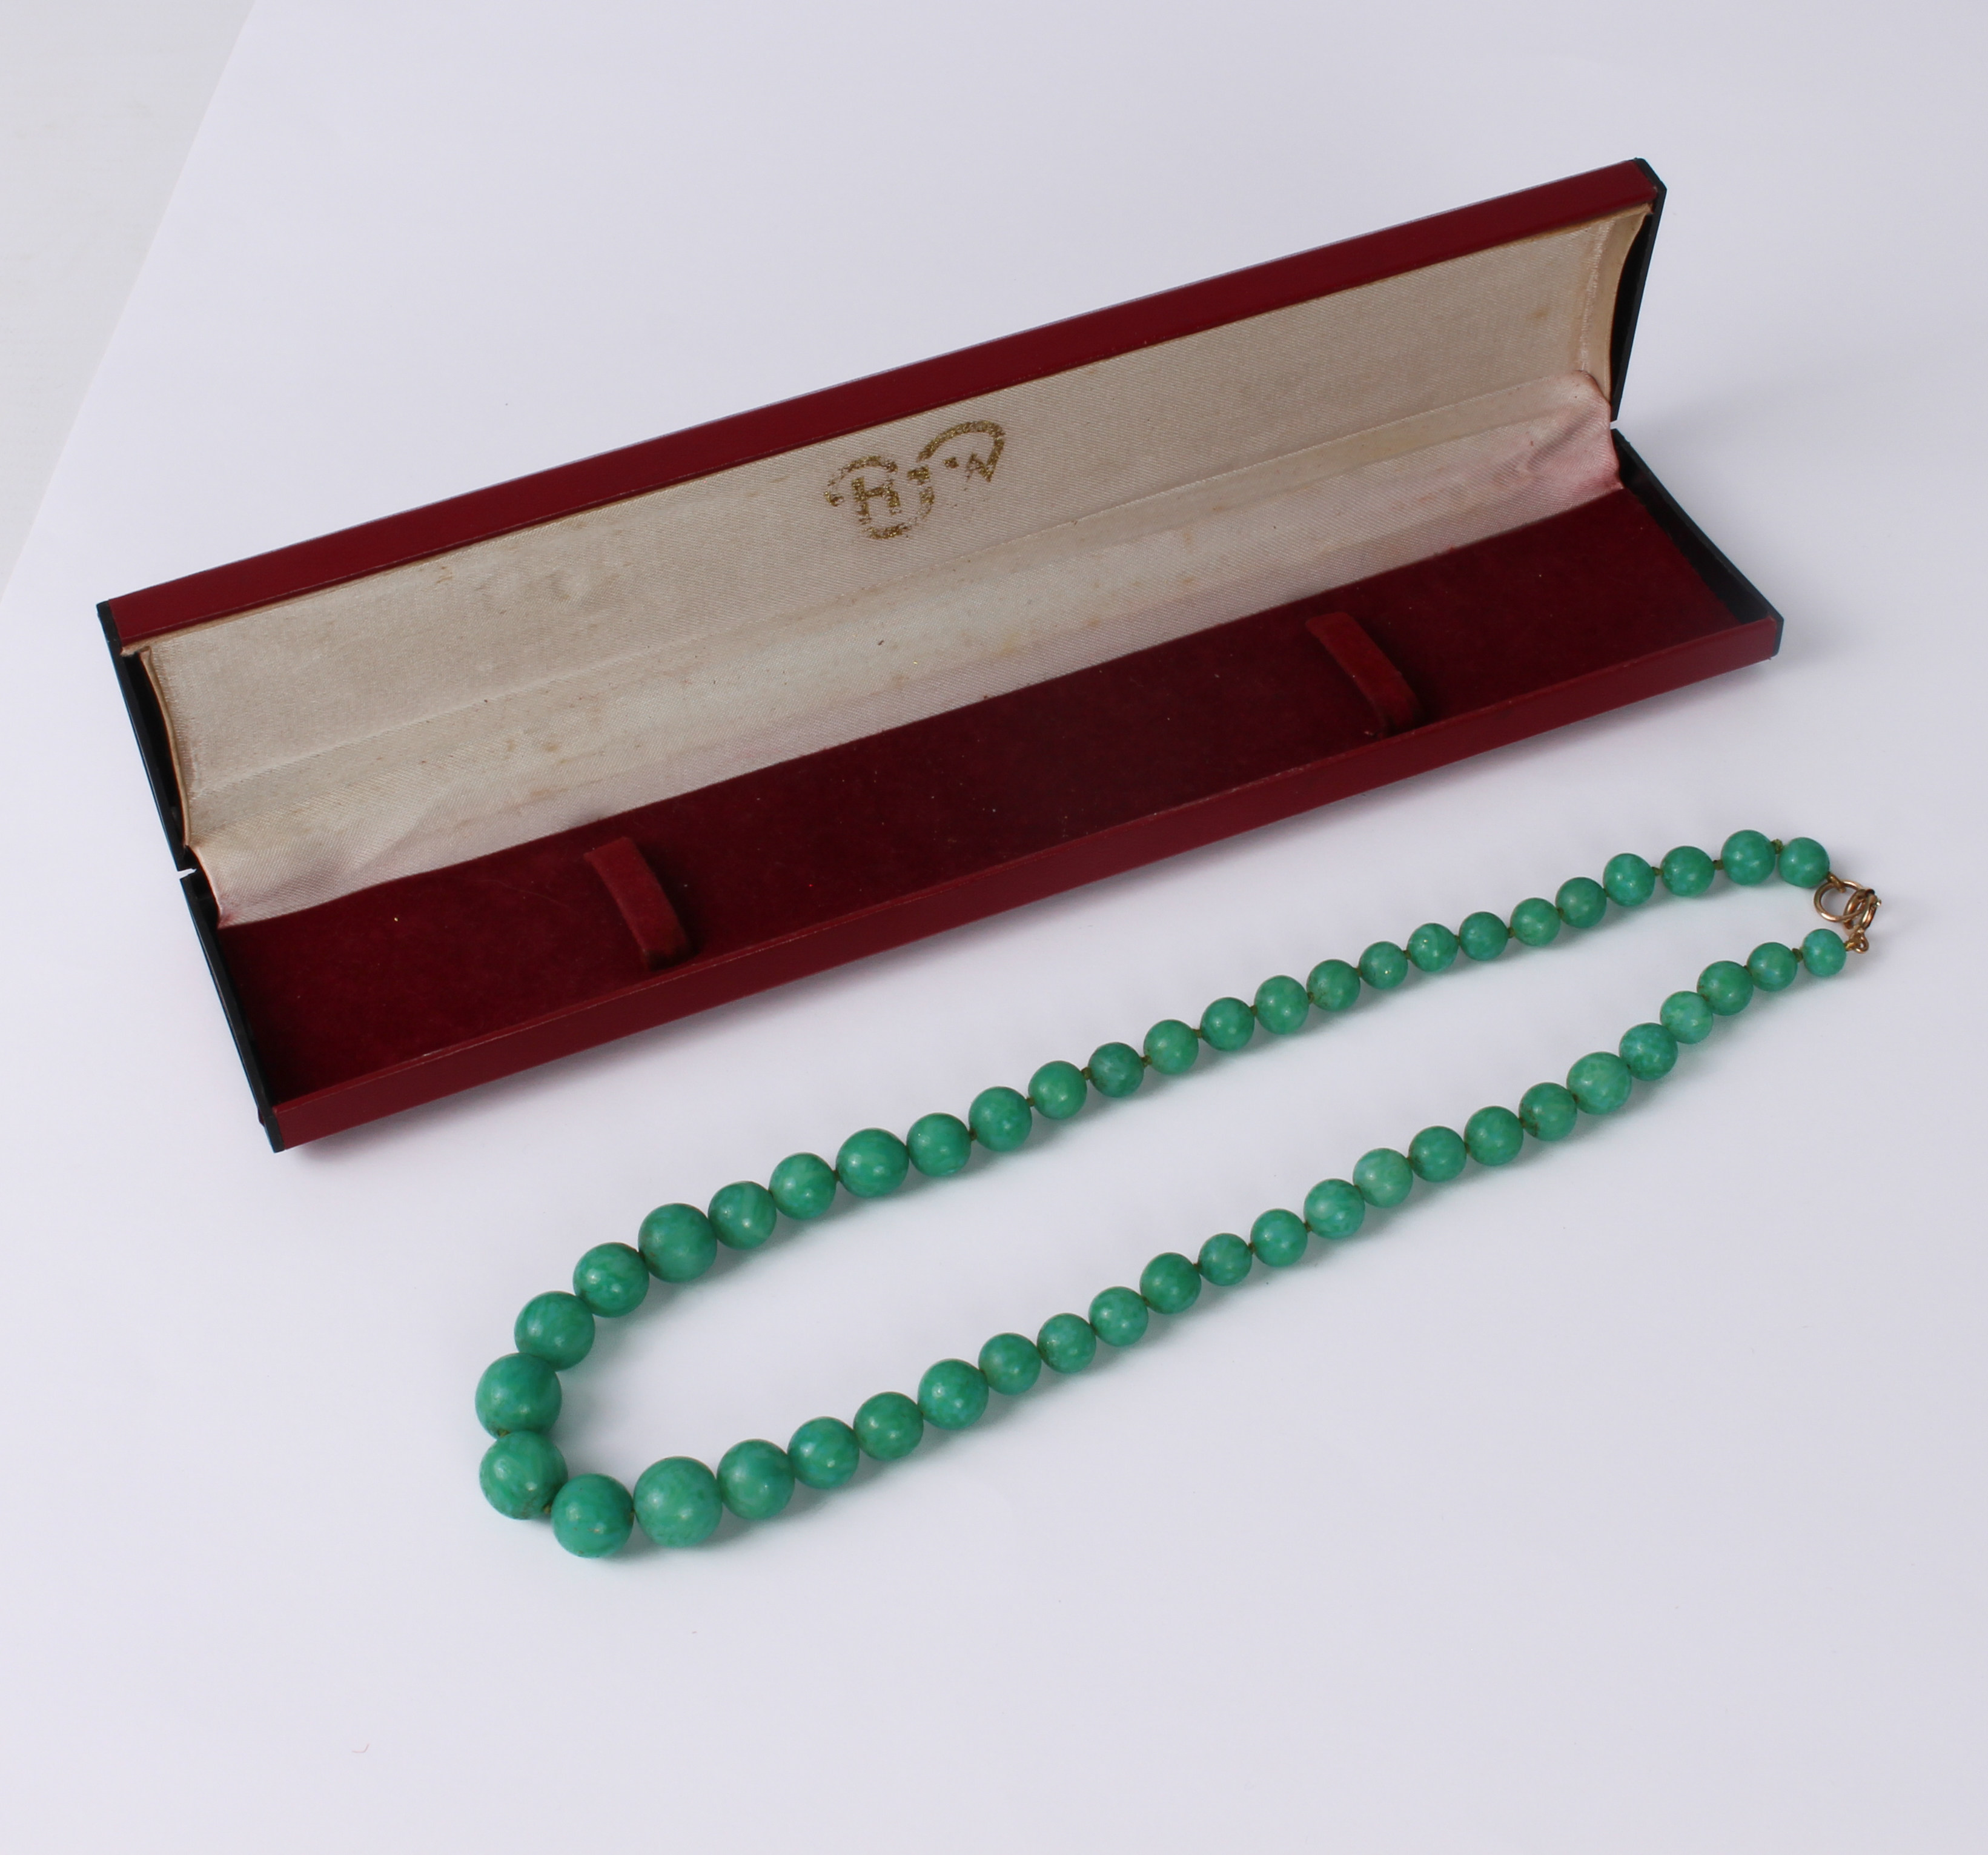 A vintage green glass jade-style bead necklace - mid-century, with 9ct gold clasp, 45.75 cm long; - Bild 3 aus 3